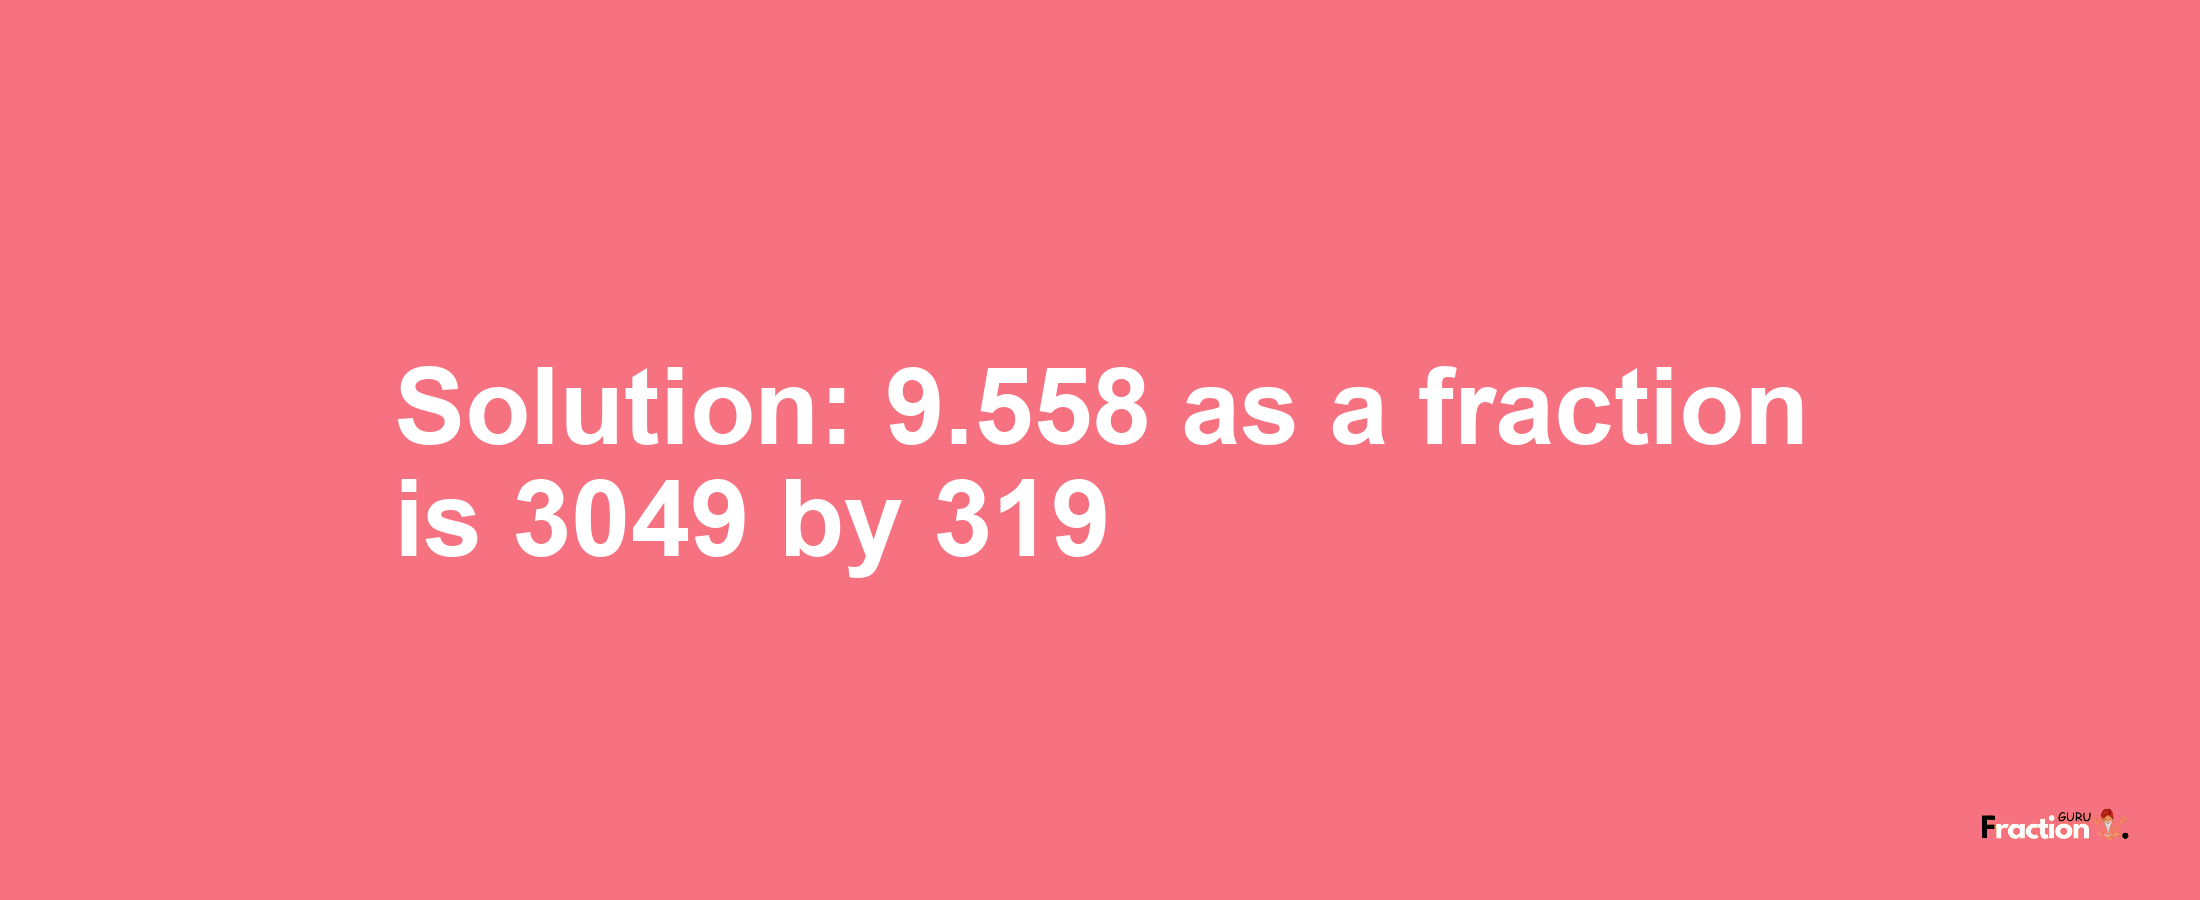 Solution:9.558 as a fraction is 3049/319